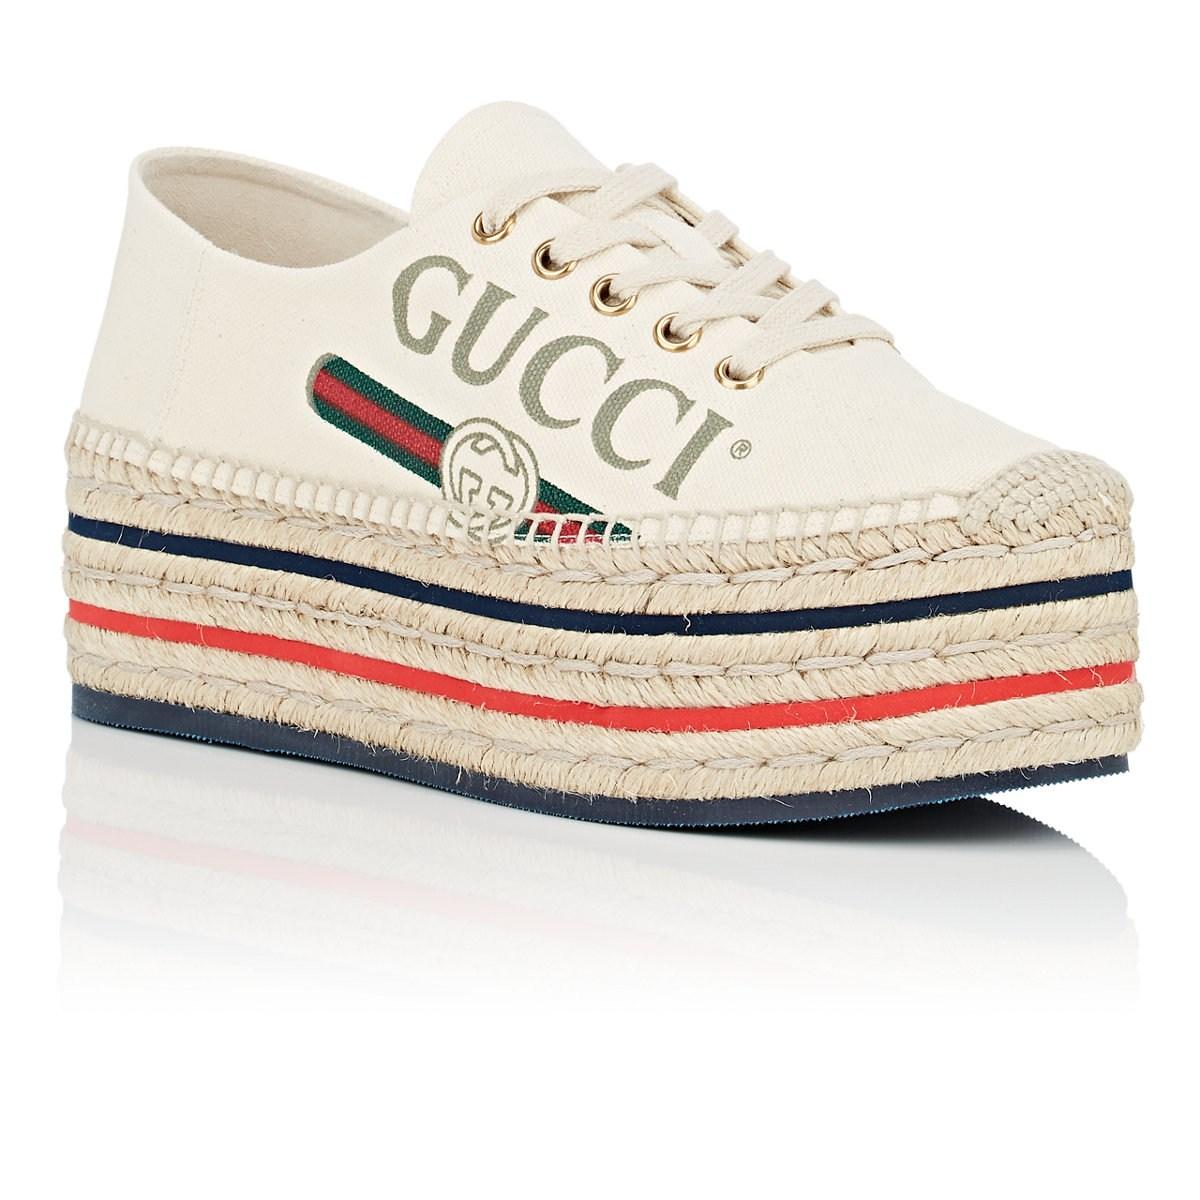 Gucci Canvas Platform Espadrille Sneakers in White - Lyst